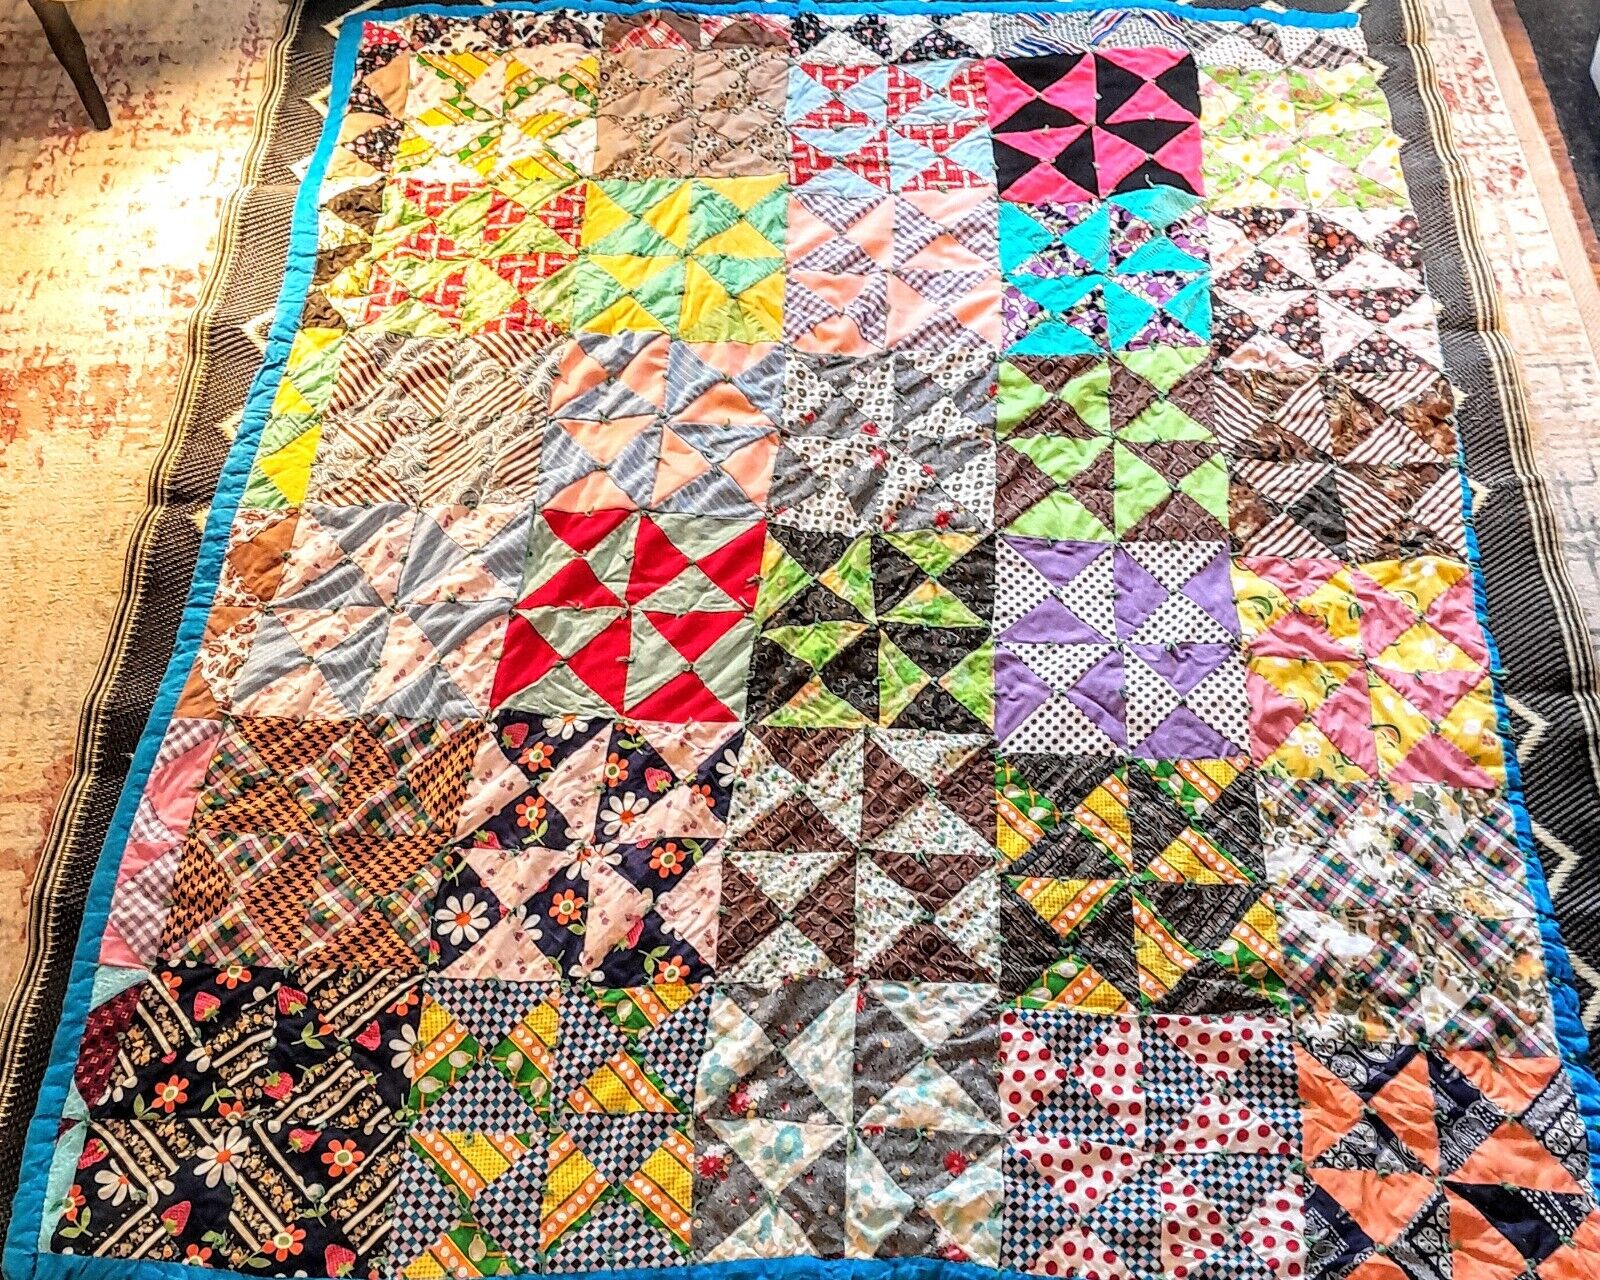 VINTAGE HAND STITCHED COLORFUL SQUARE QUILT HAND PIECED  PATCHWORK 65x75